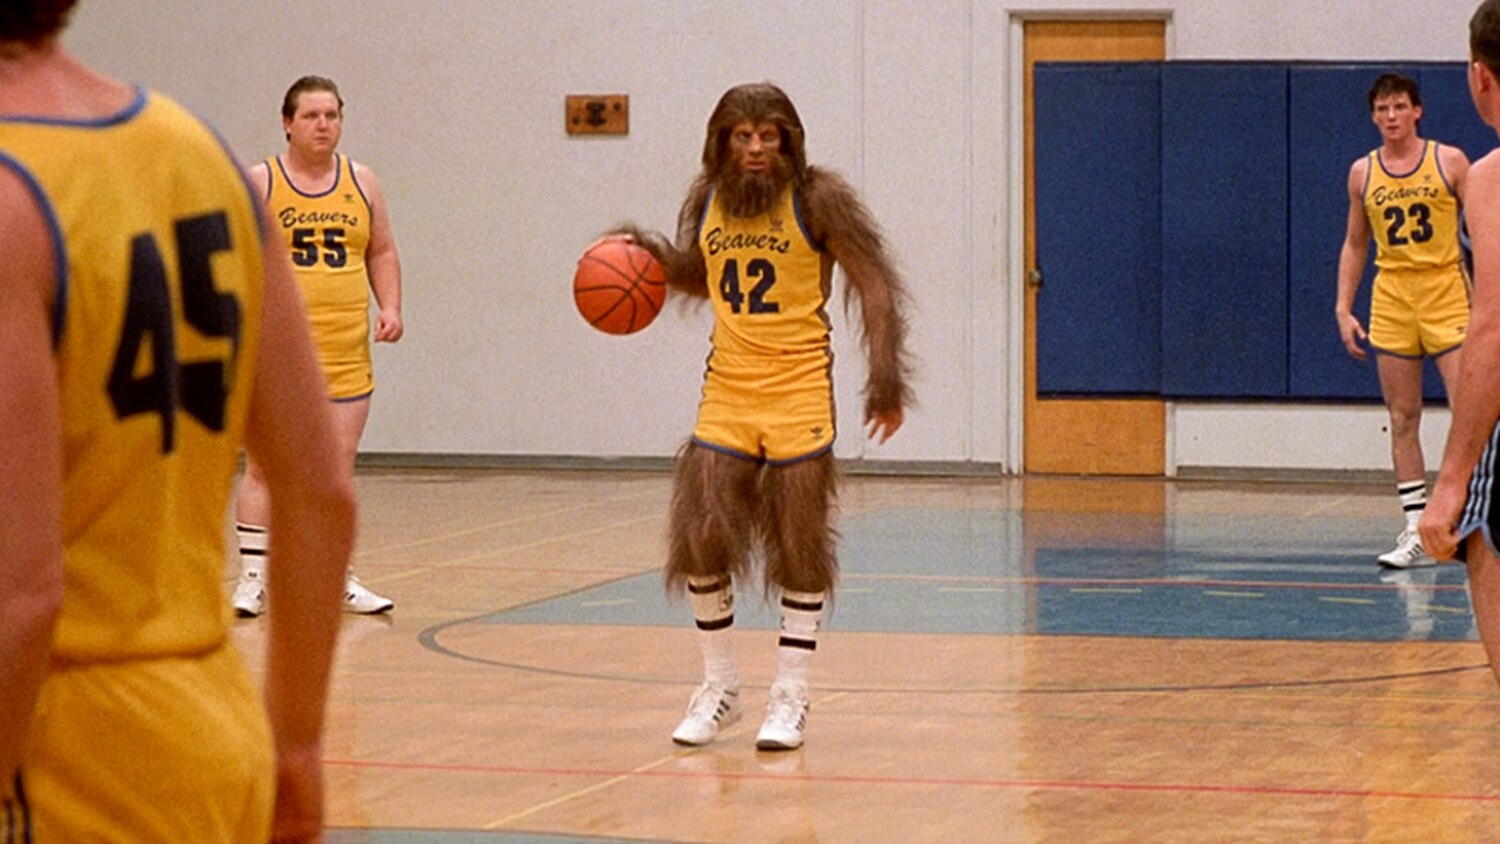 Teen wolf ending basketball game dick out